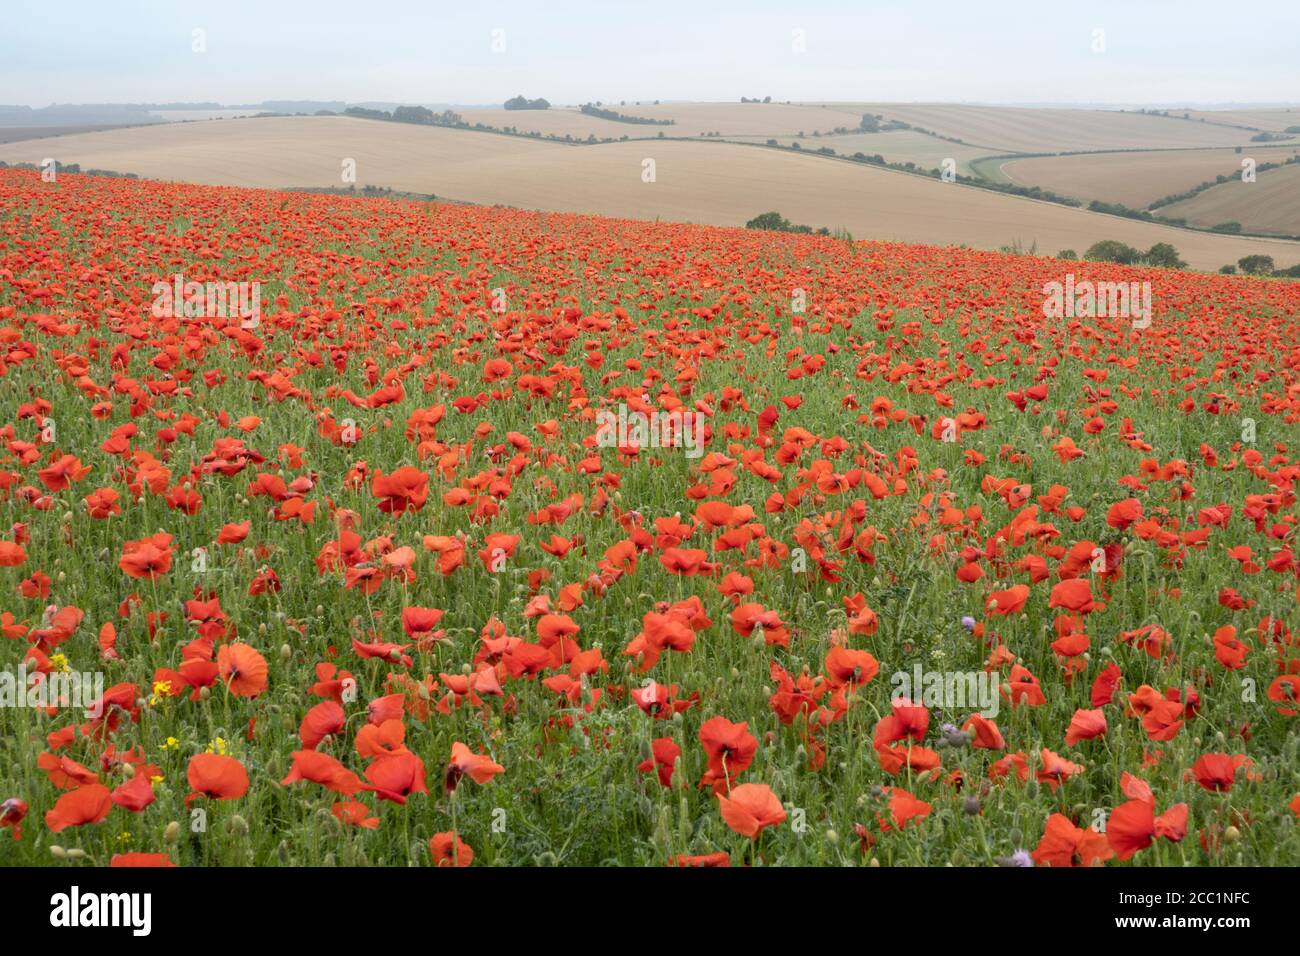 Mass of red poppies growing in field, East Garston, West Berkshire, England, United Kingdom, Europe Stock Photo